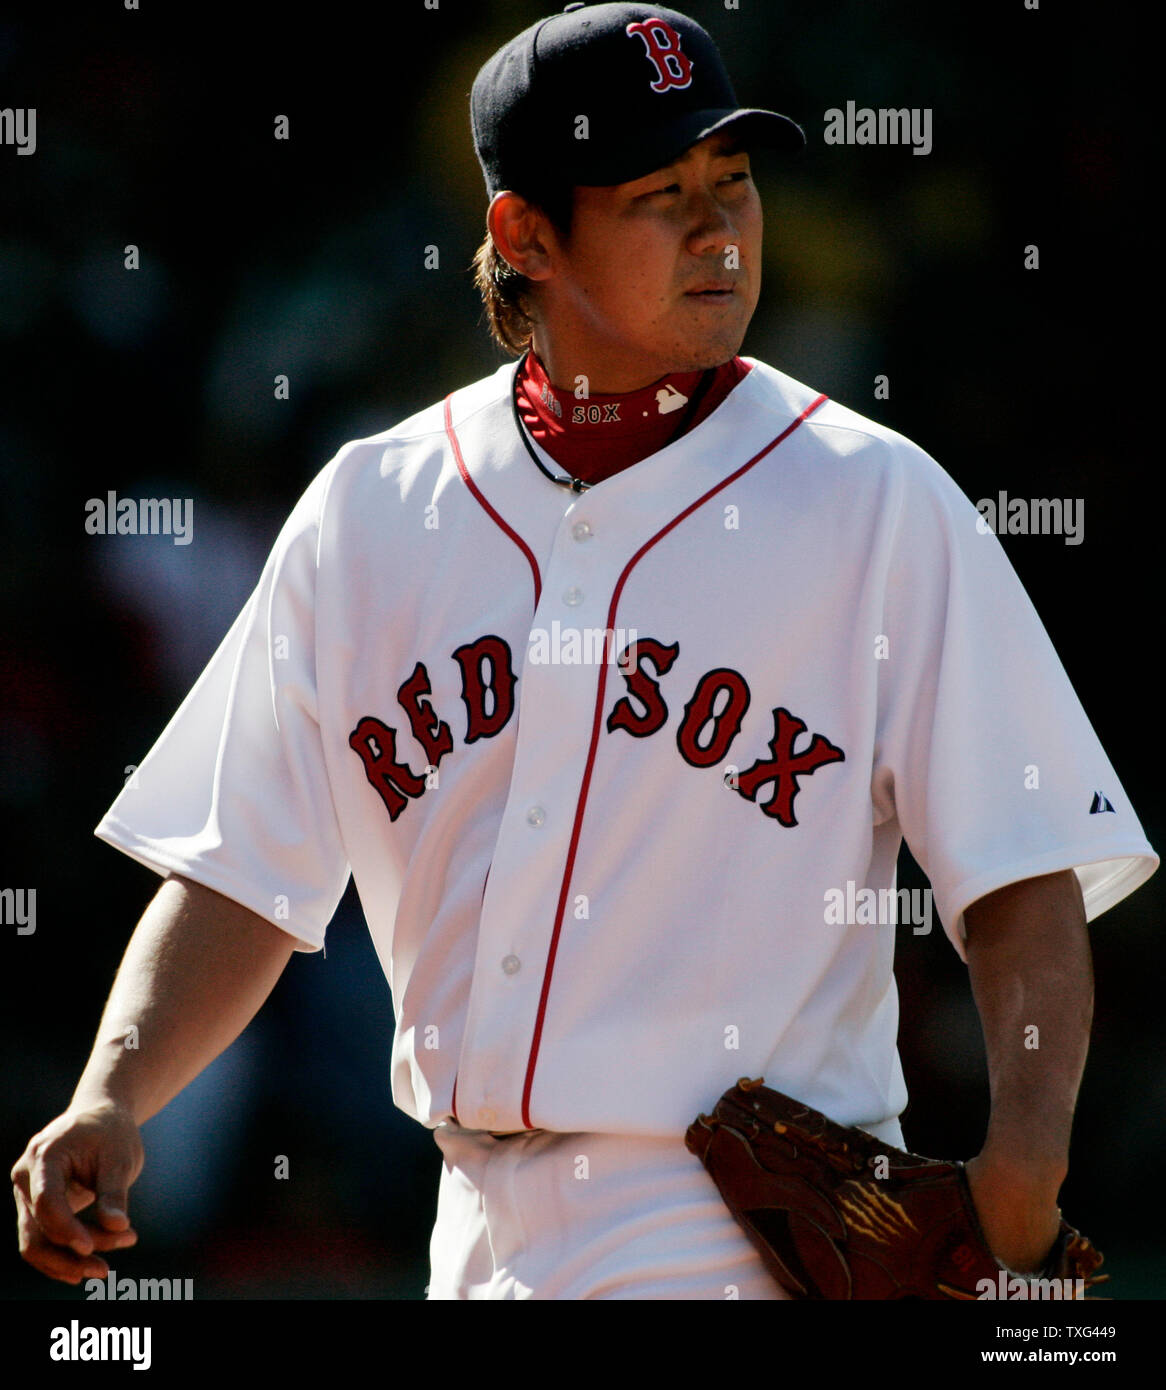 In Fenway Park Debut, Matsuzaka Is Upstaged - The New York Times